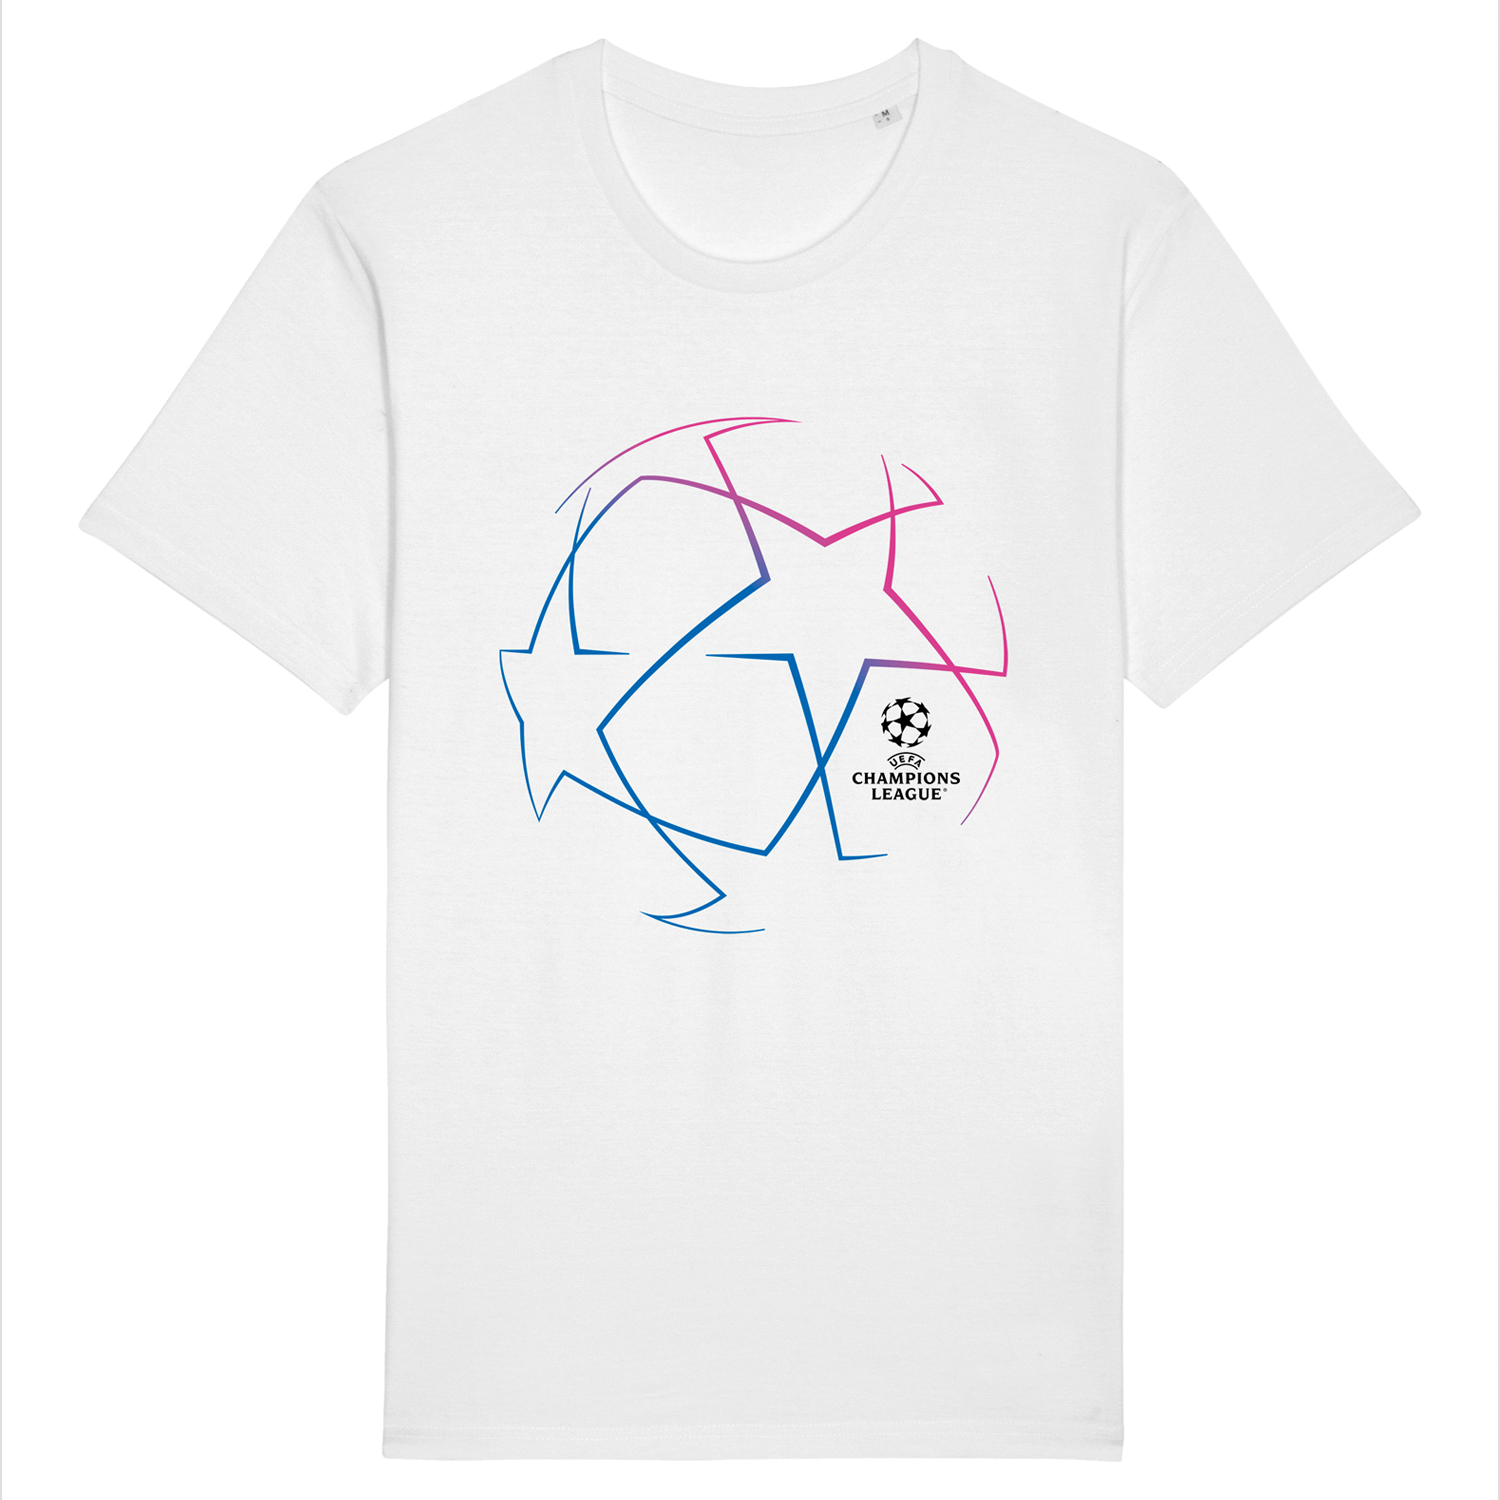 UEFA Champions League - Starball White T-Shirt UEFA Club Competitions Online Store